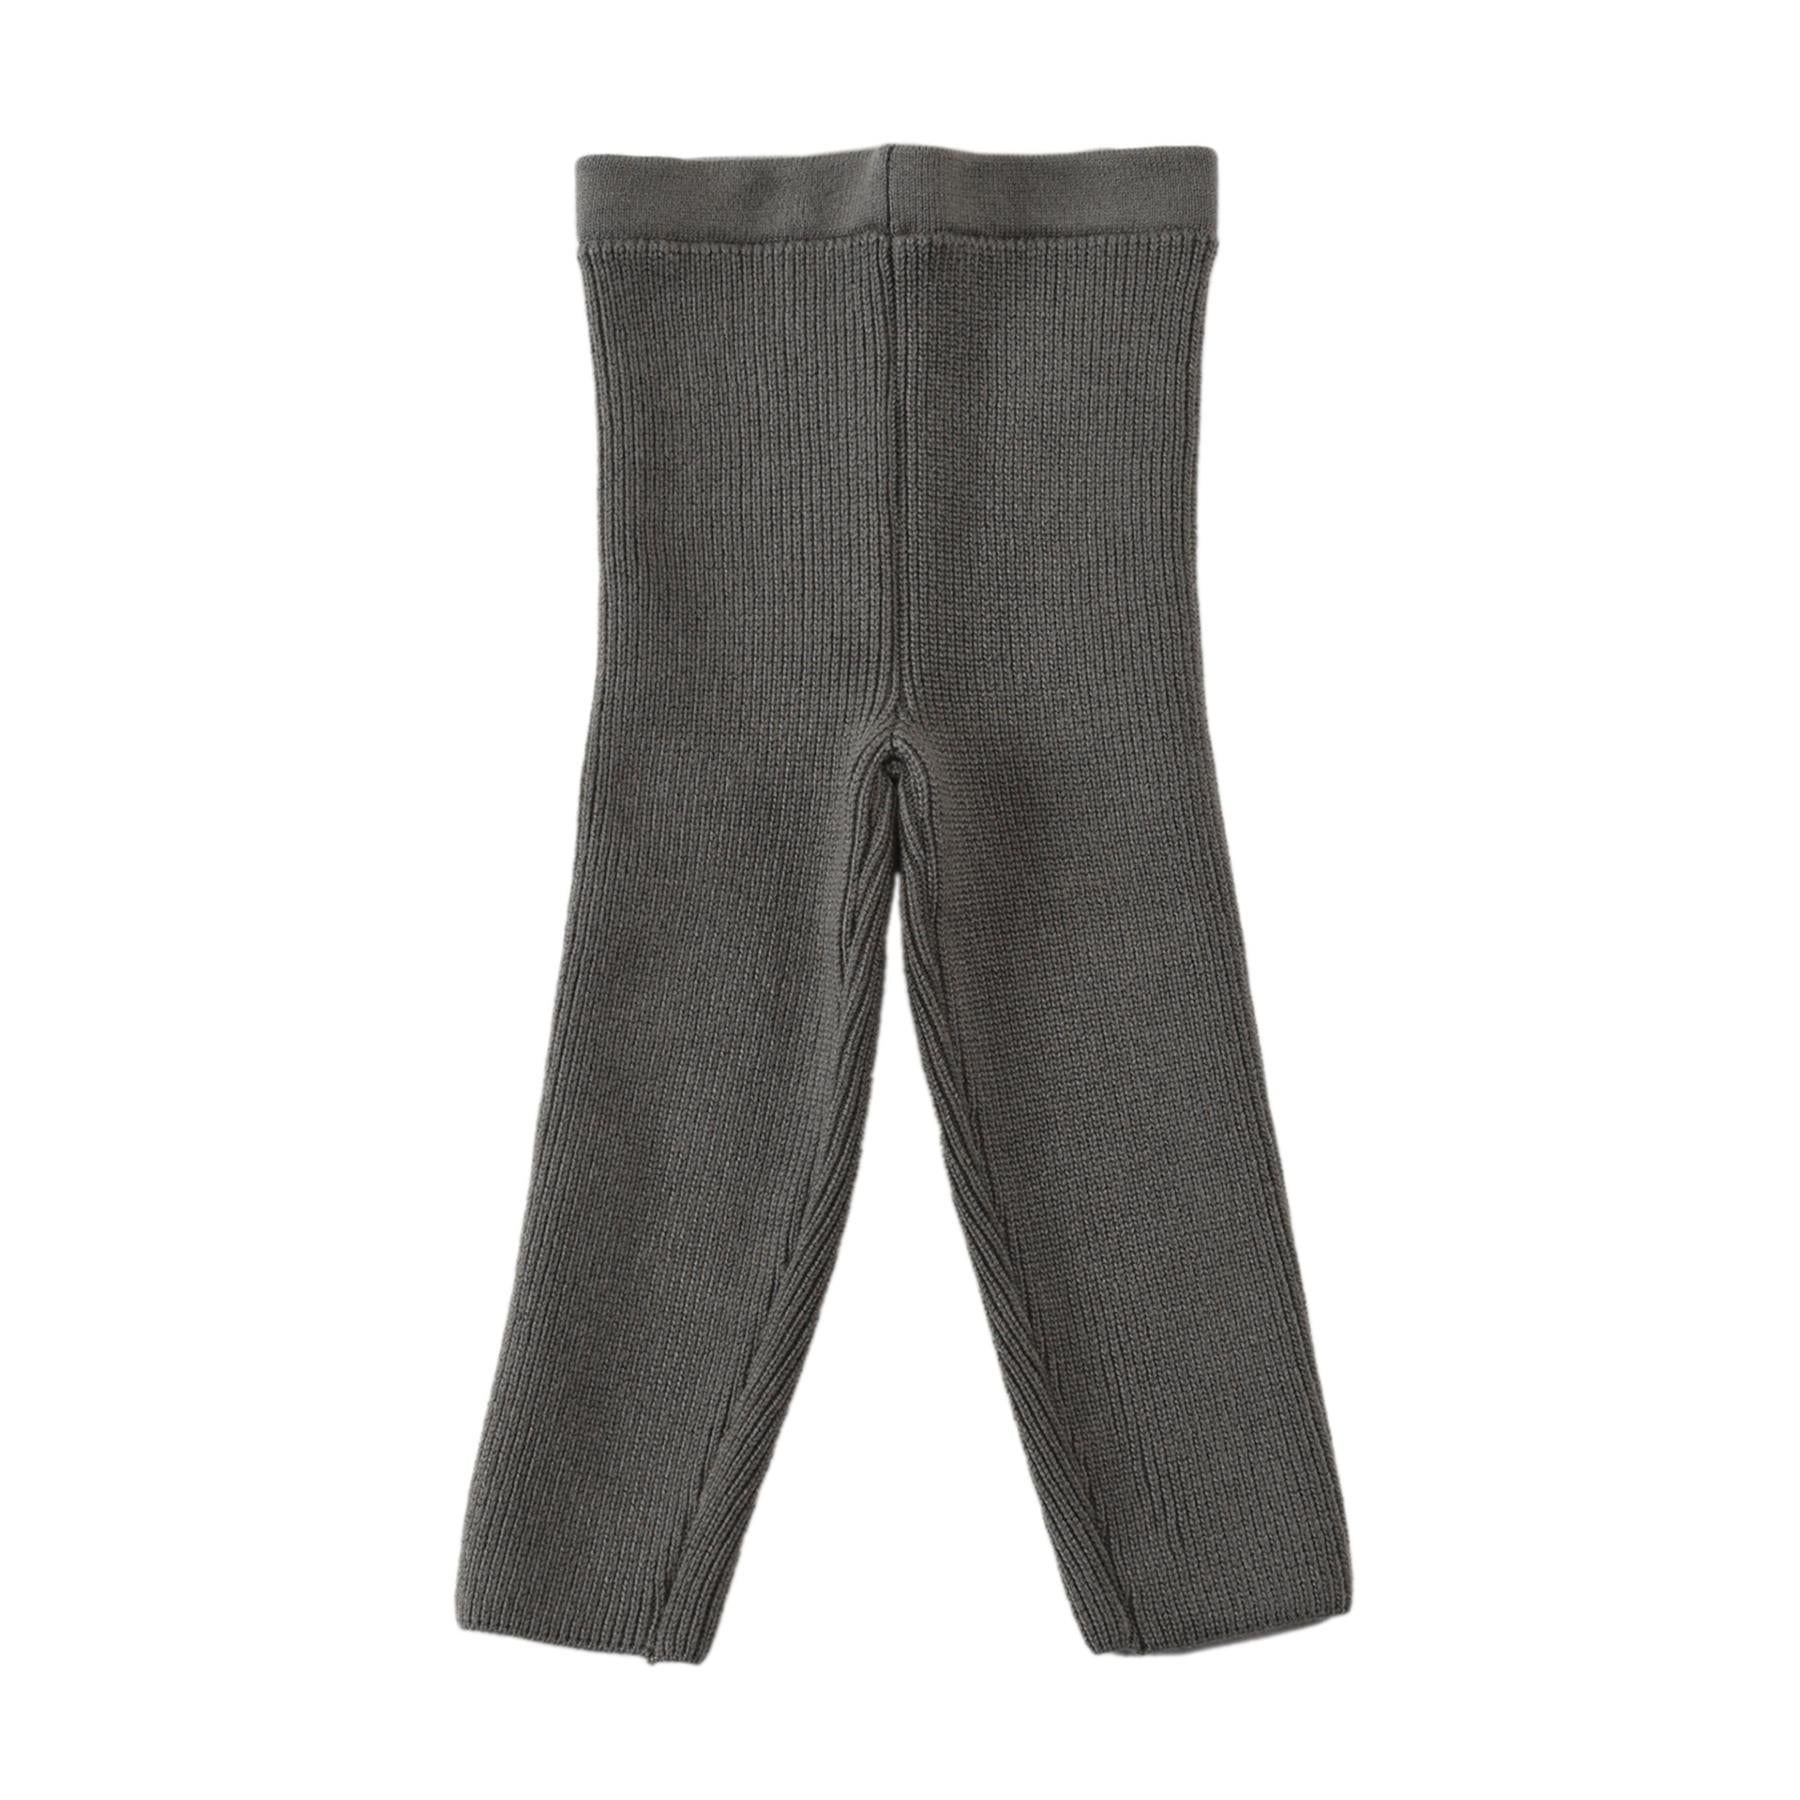 Organic Cotton Baby and Kids Knitted Pants Leggings Gray